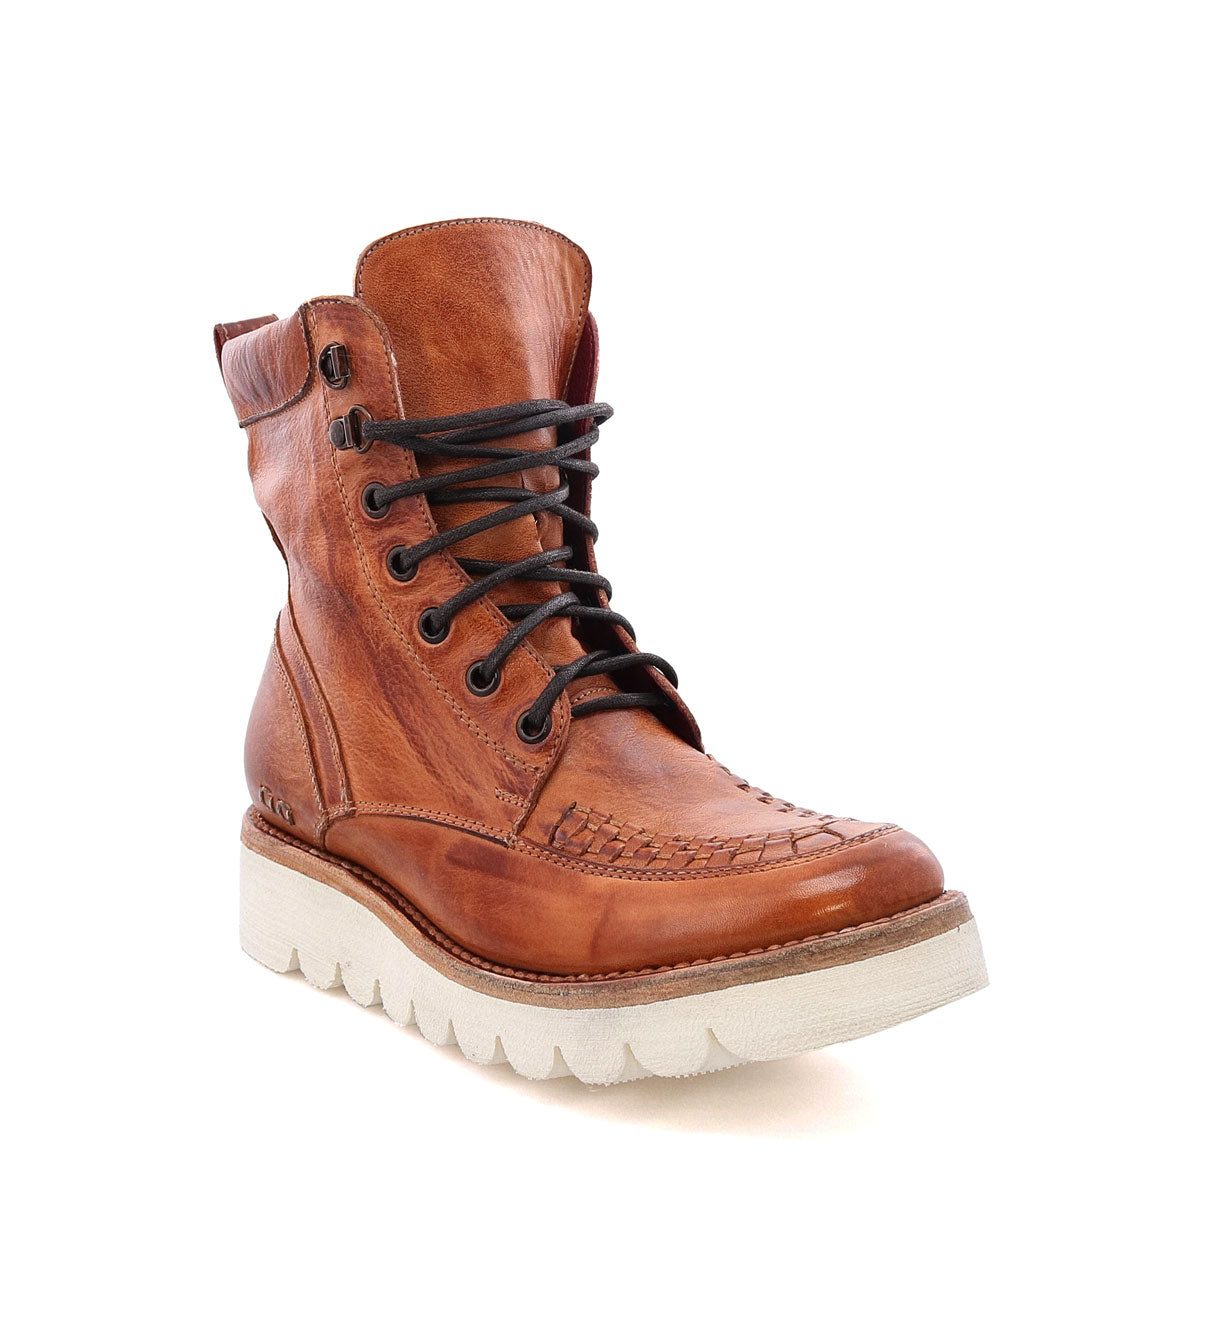 A women's brown leather Elisha II boot with a white sole by Bed Stu.